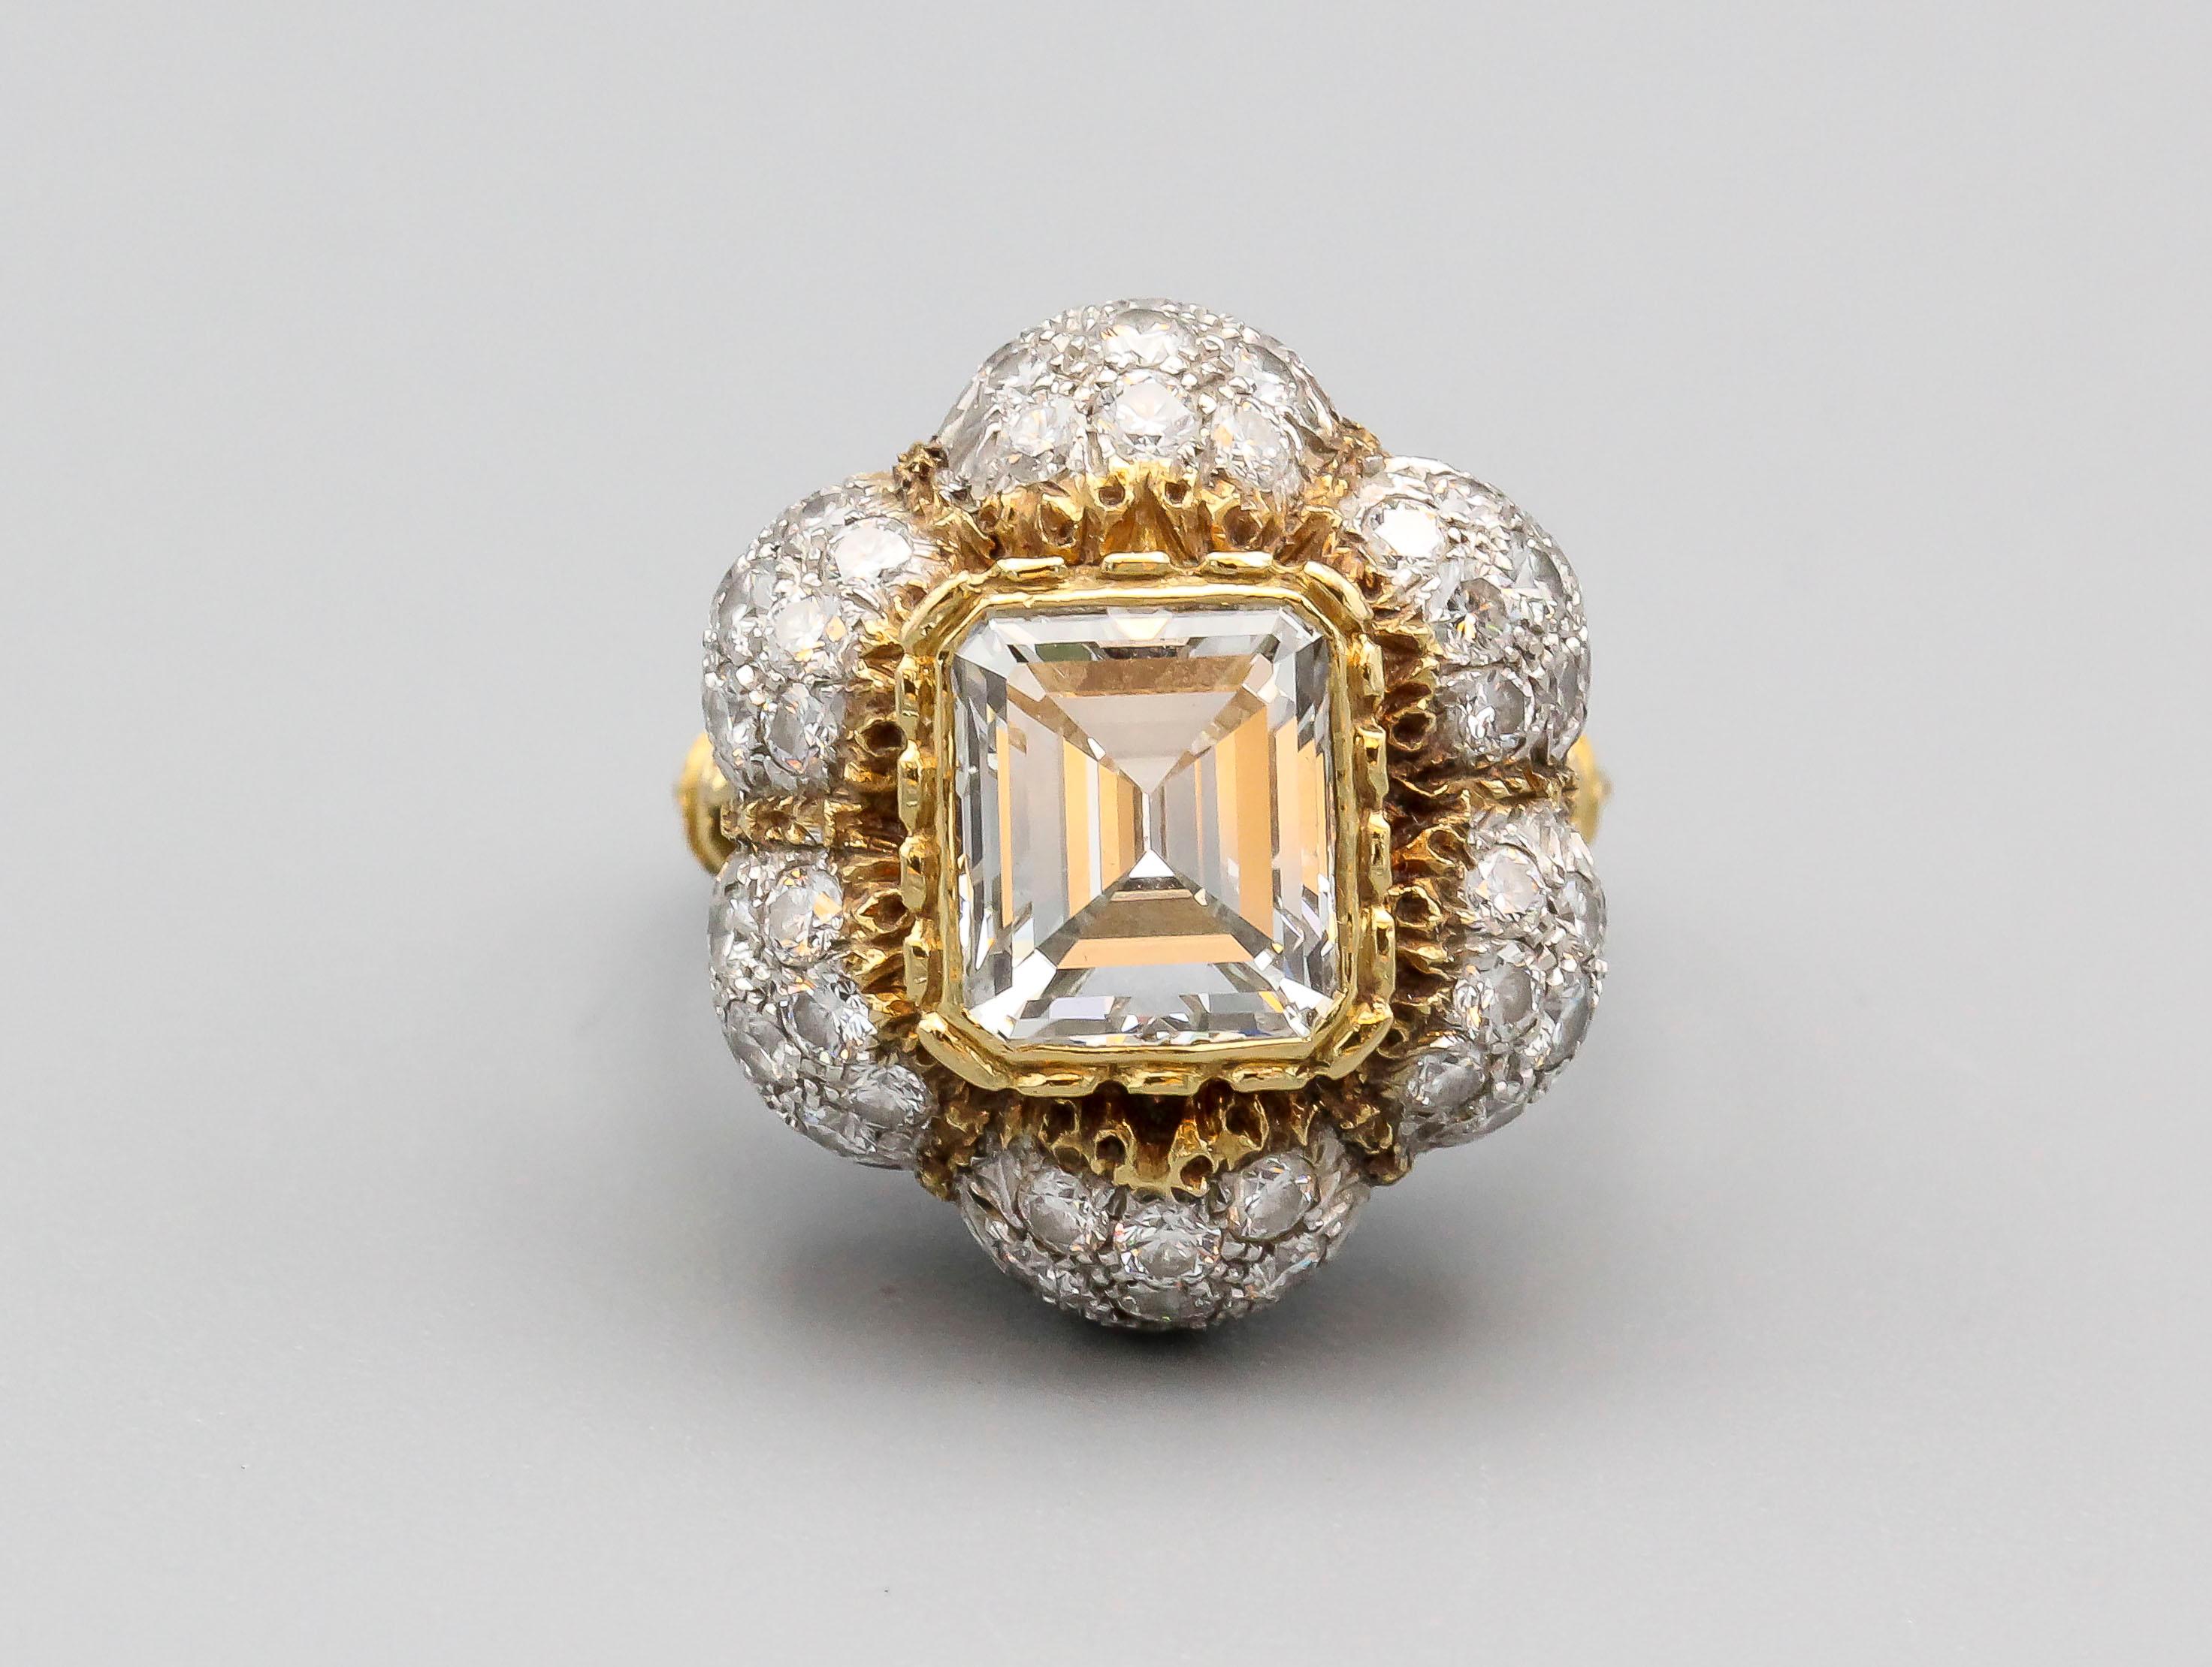 Very fine diamond and two-tone 18k gold ring by Federico Buccellati. This stunning ring features a high grade emerald cut diamond center stone of approx. 3.0 cts in weight, approx. measurements 9mm length by 8mm width by 5mm depth; as well as high